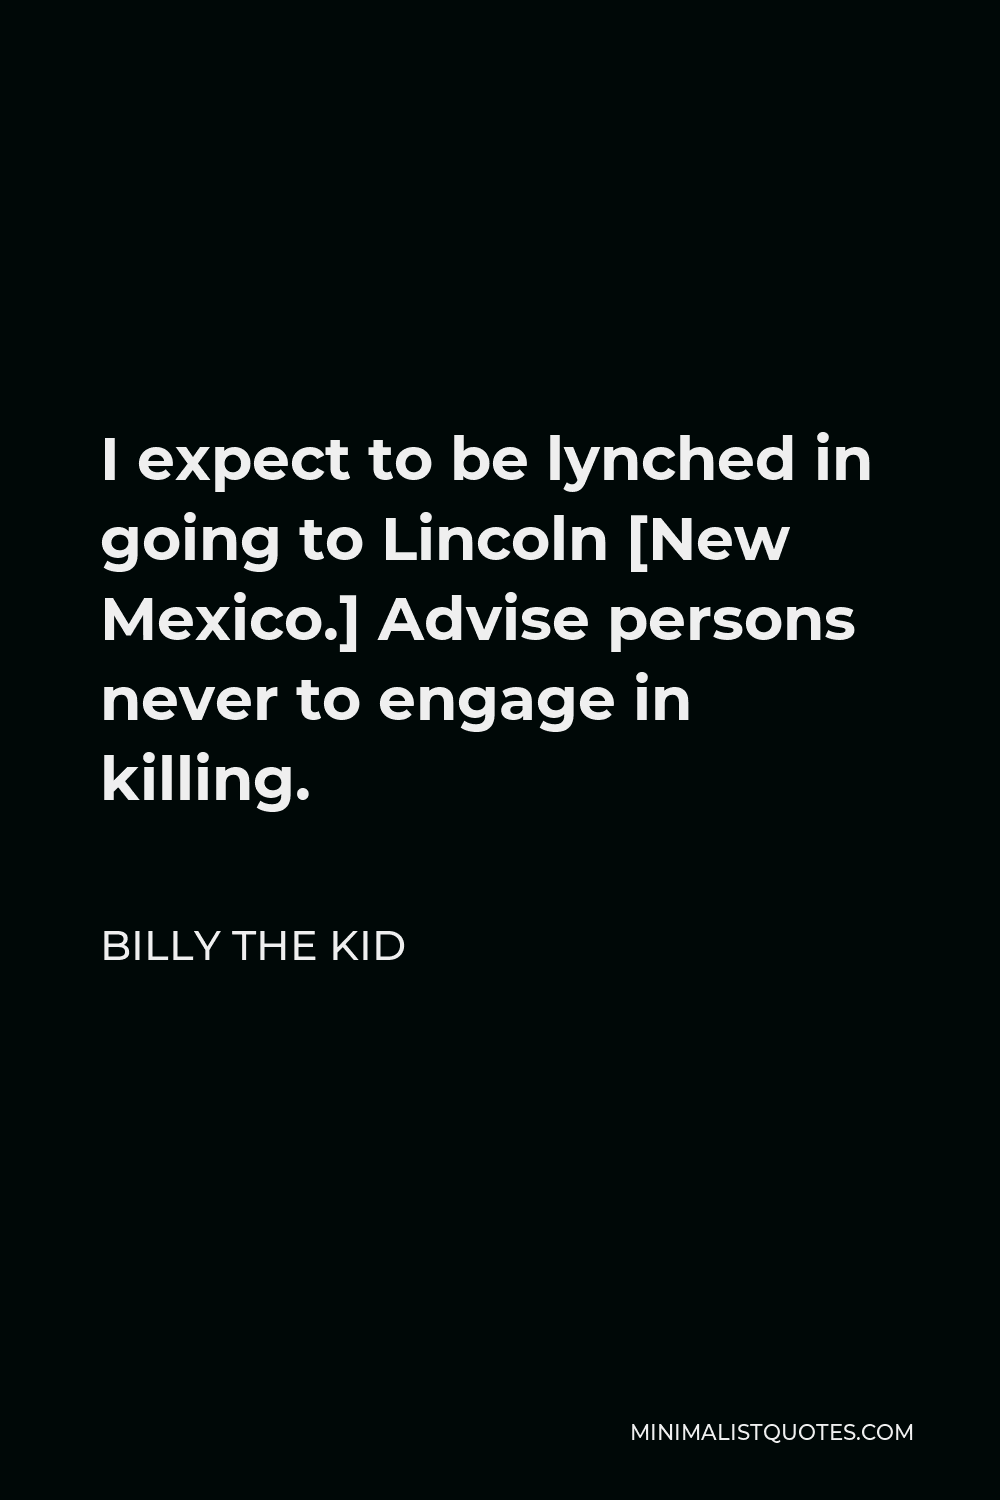 Billy the Kid Quote - I expect to be lynched in going to Lincoln [New Mexico.] Advise persons never to engage in killing.